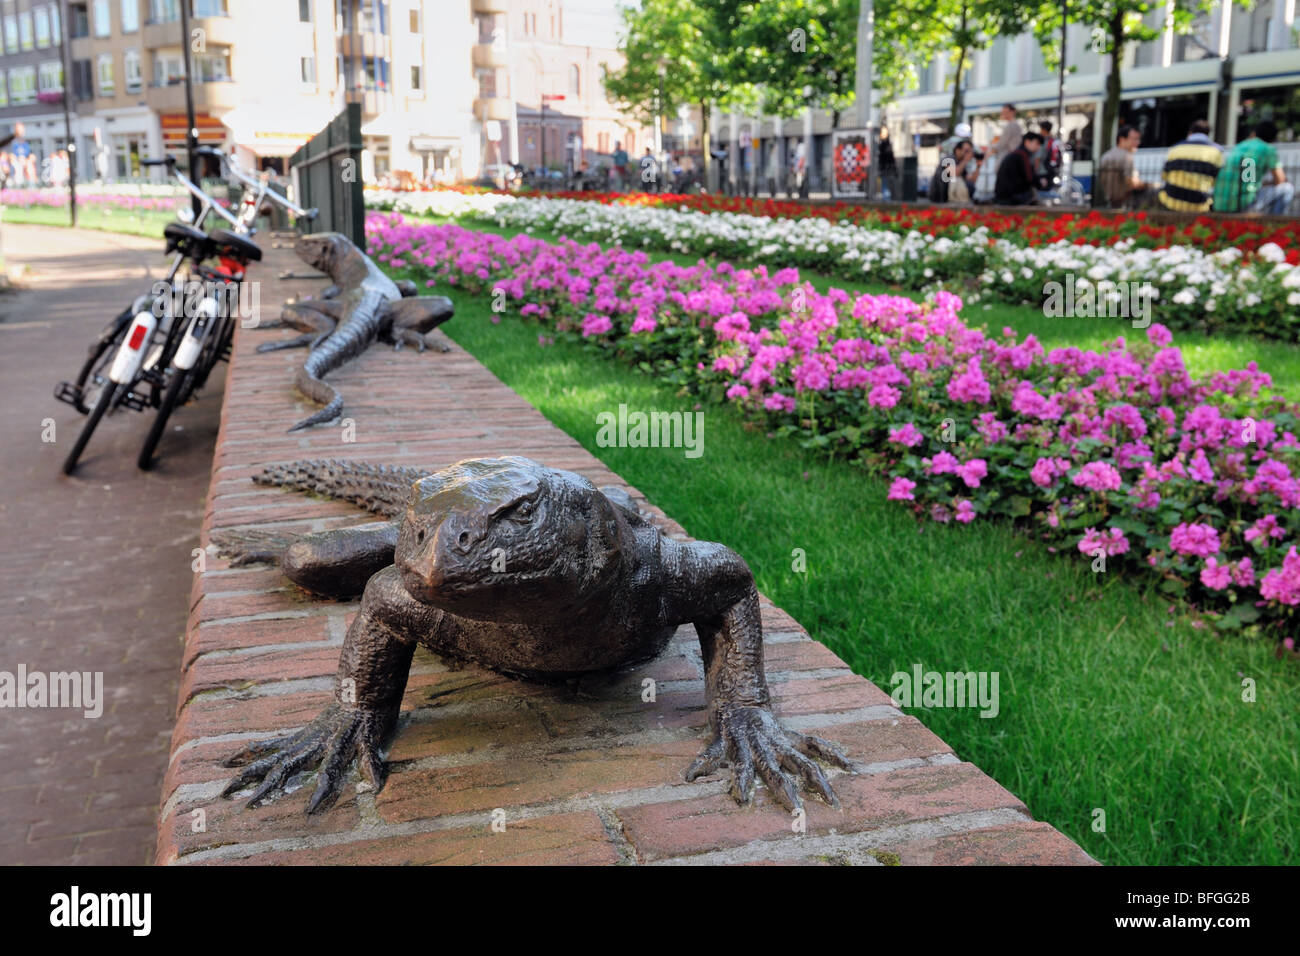 Two life-size lizards sculptures made in 1994 to decorate the center of Amsterdam. Stock Photo